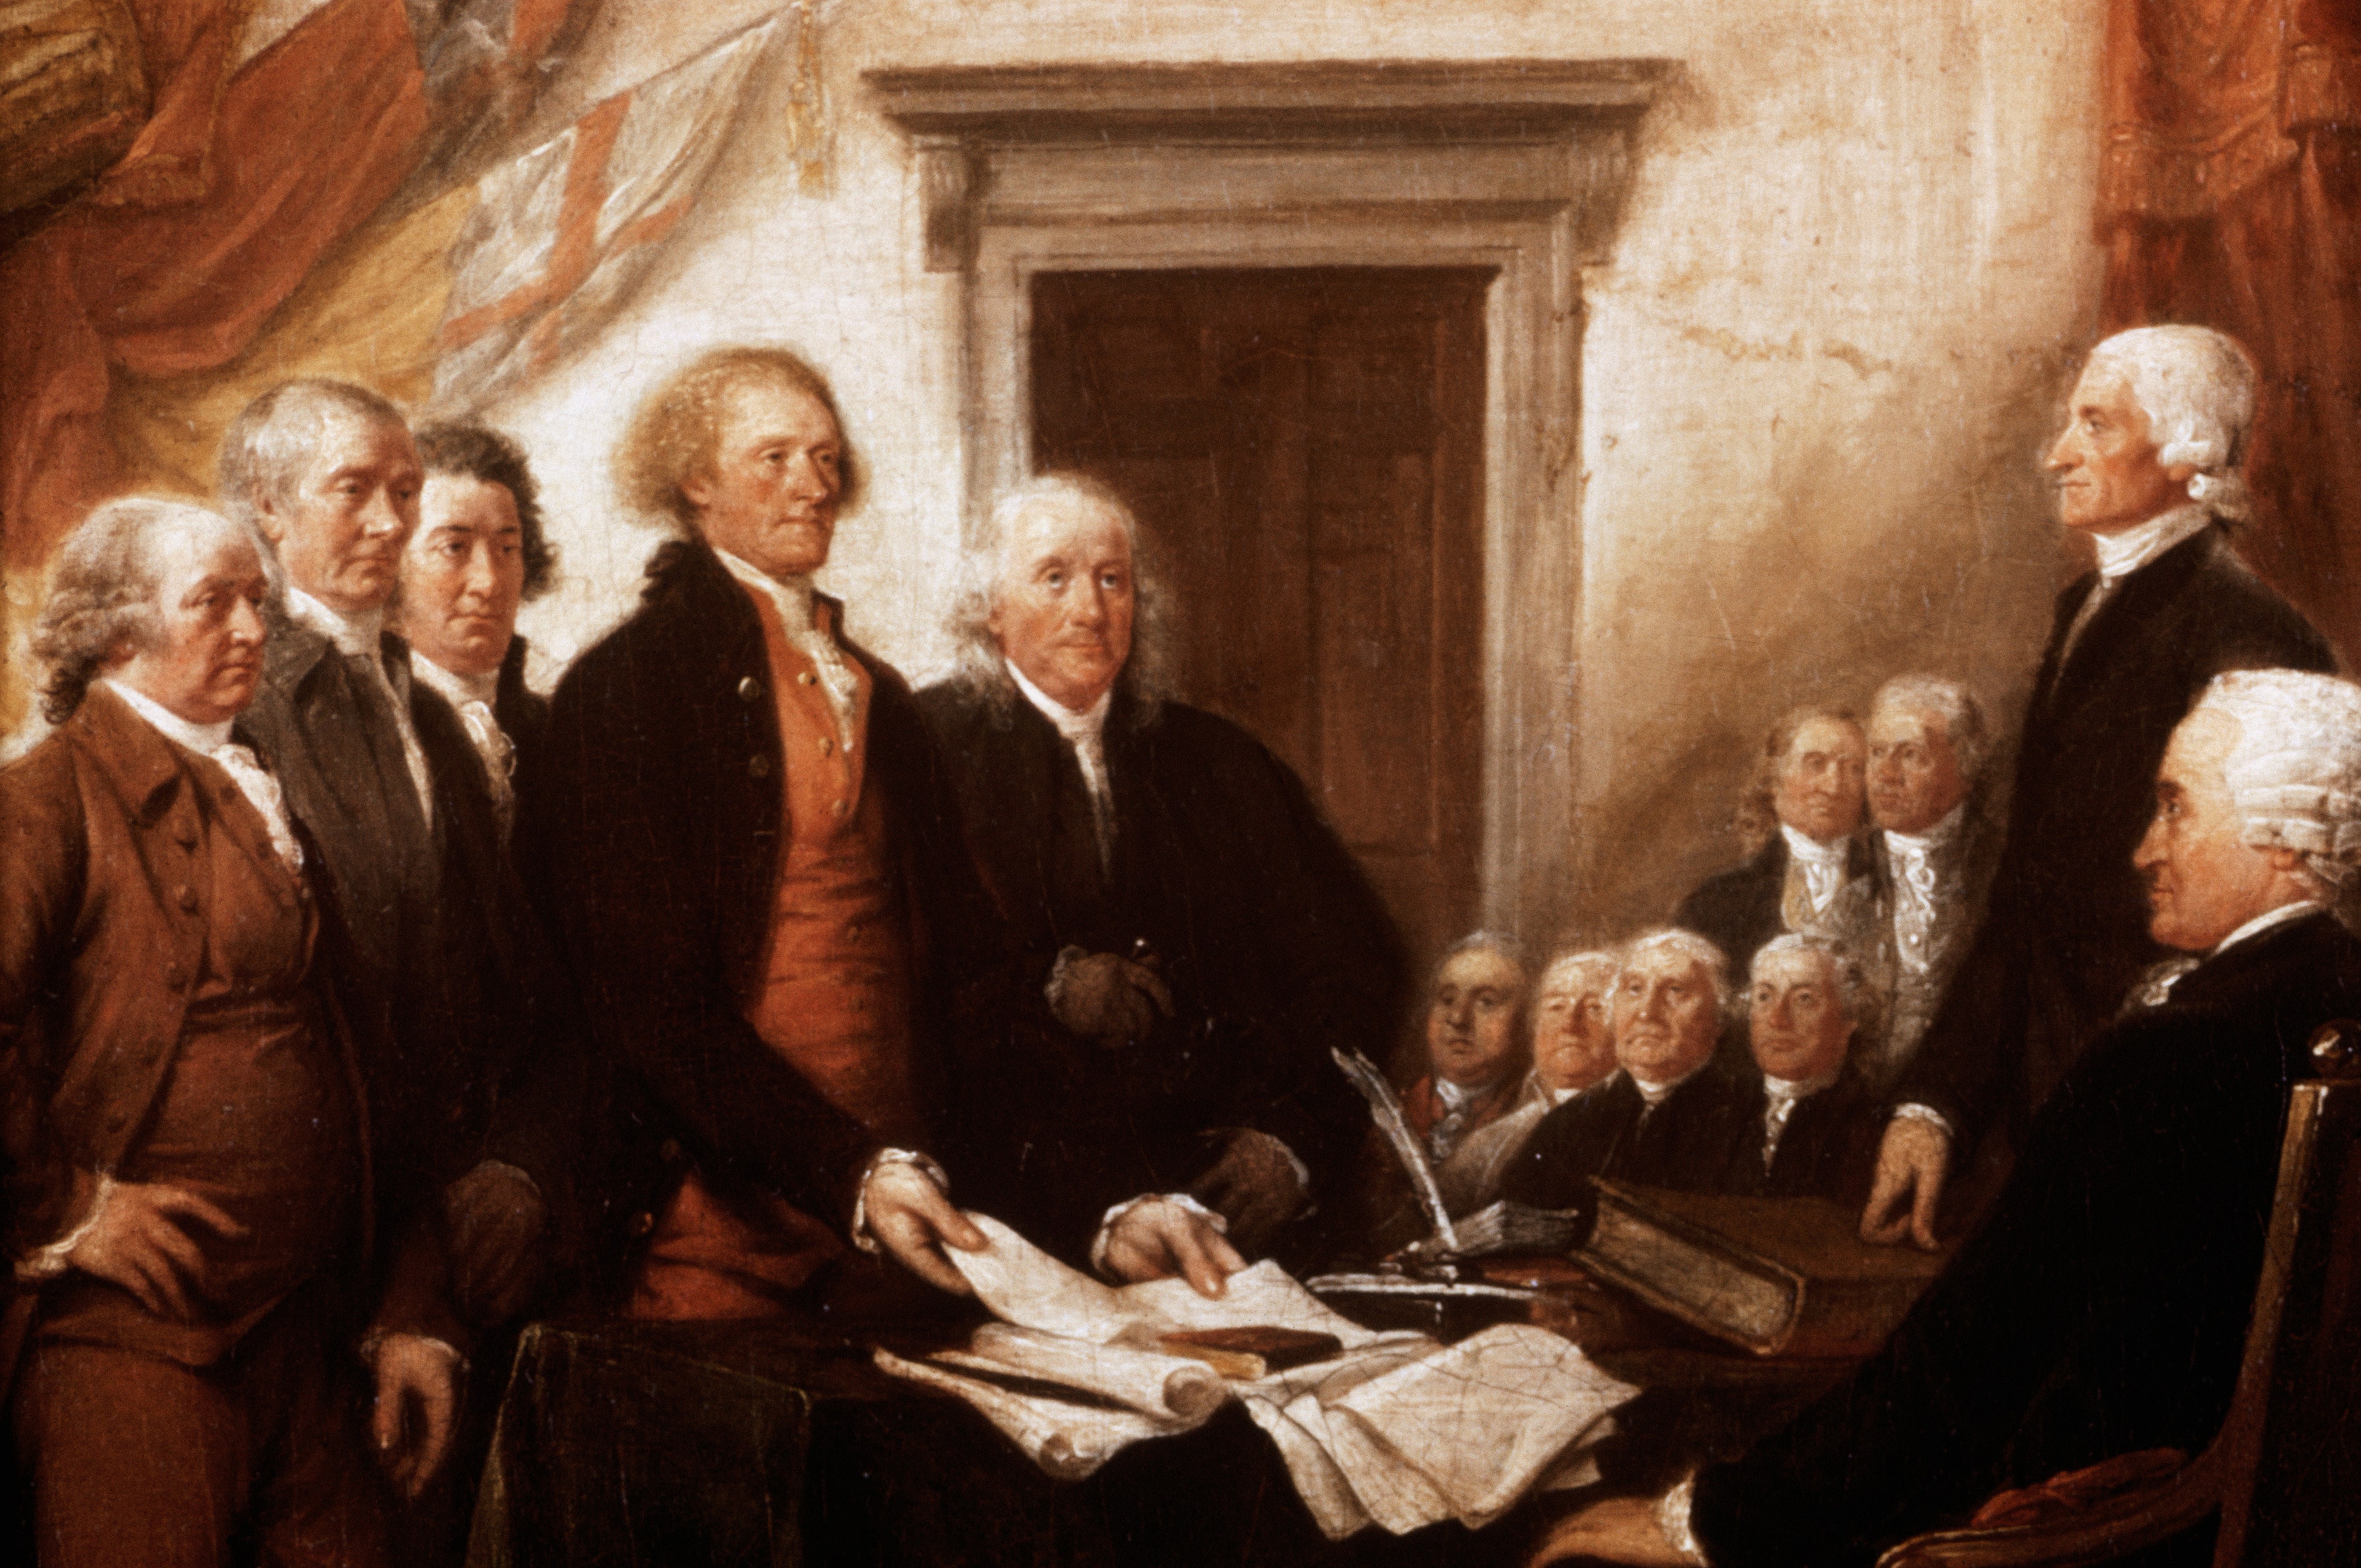 "Declaration of Independence" - detail of the painting by John Trumbell